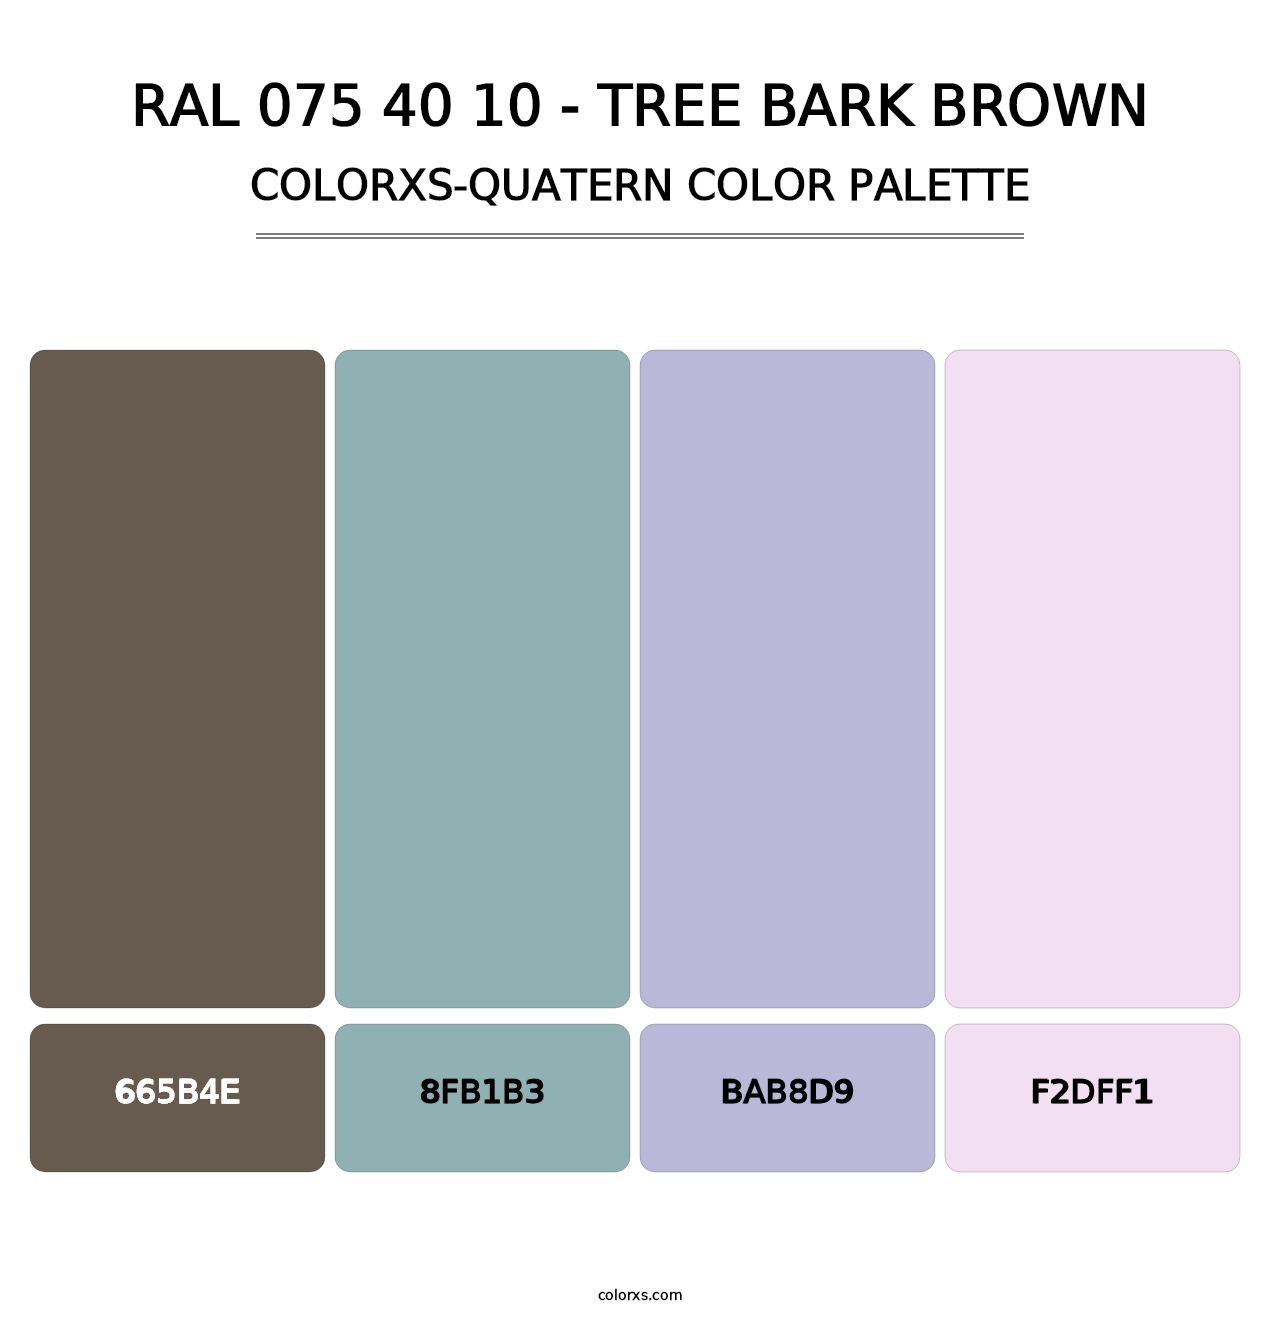 RAL 075 40 10 - Tree Bark Brown - Colorxs Quatern Palette